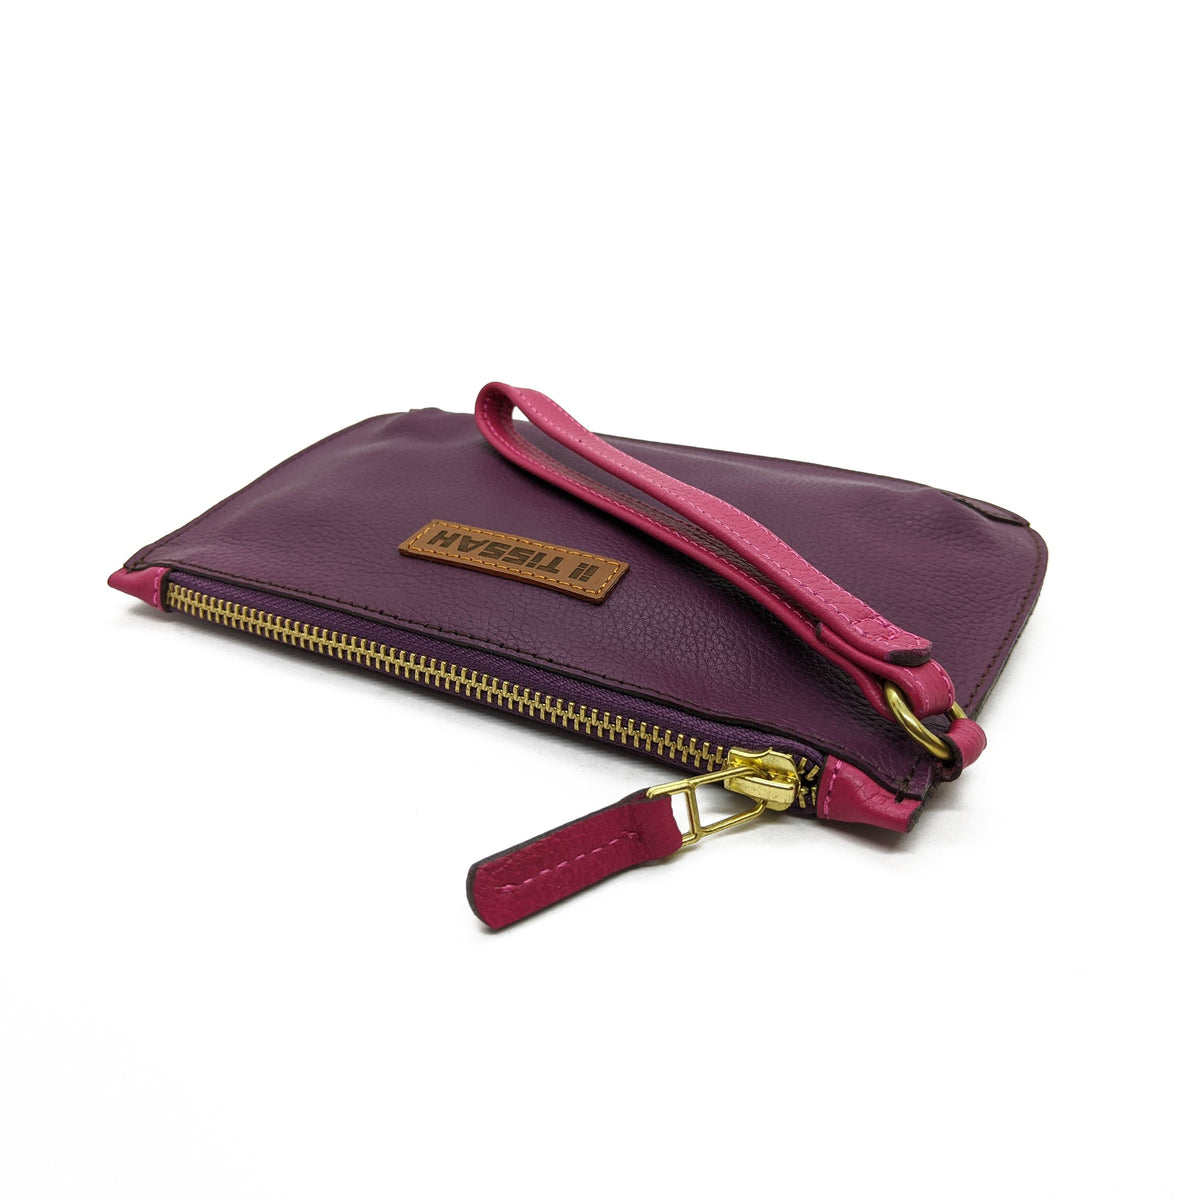 Wristlet - Purple with Pink trimmings